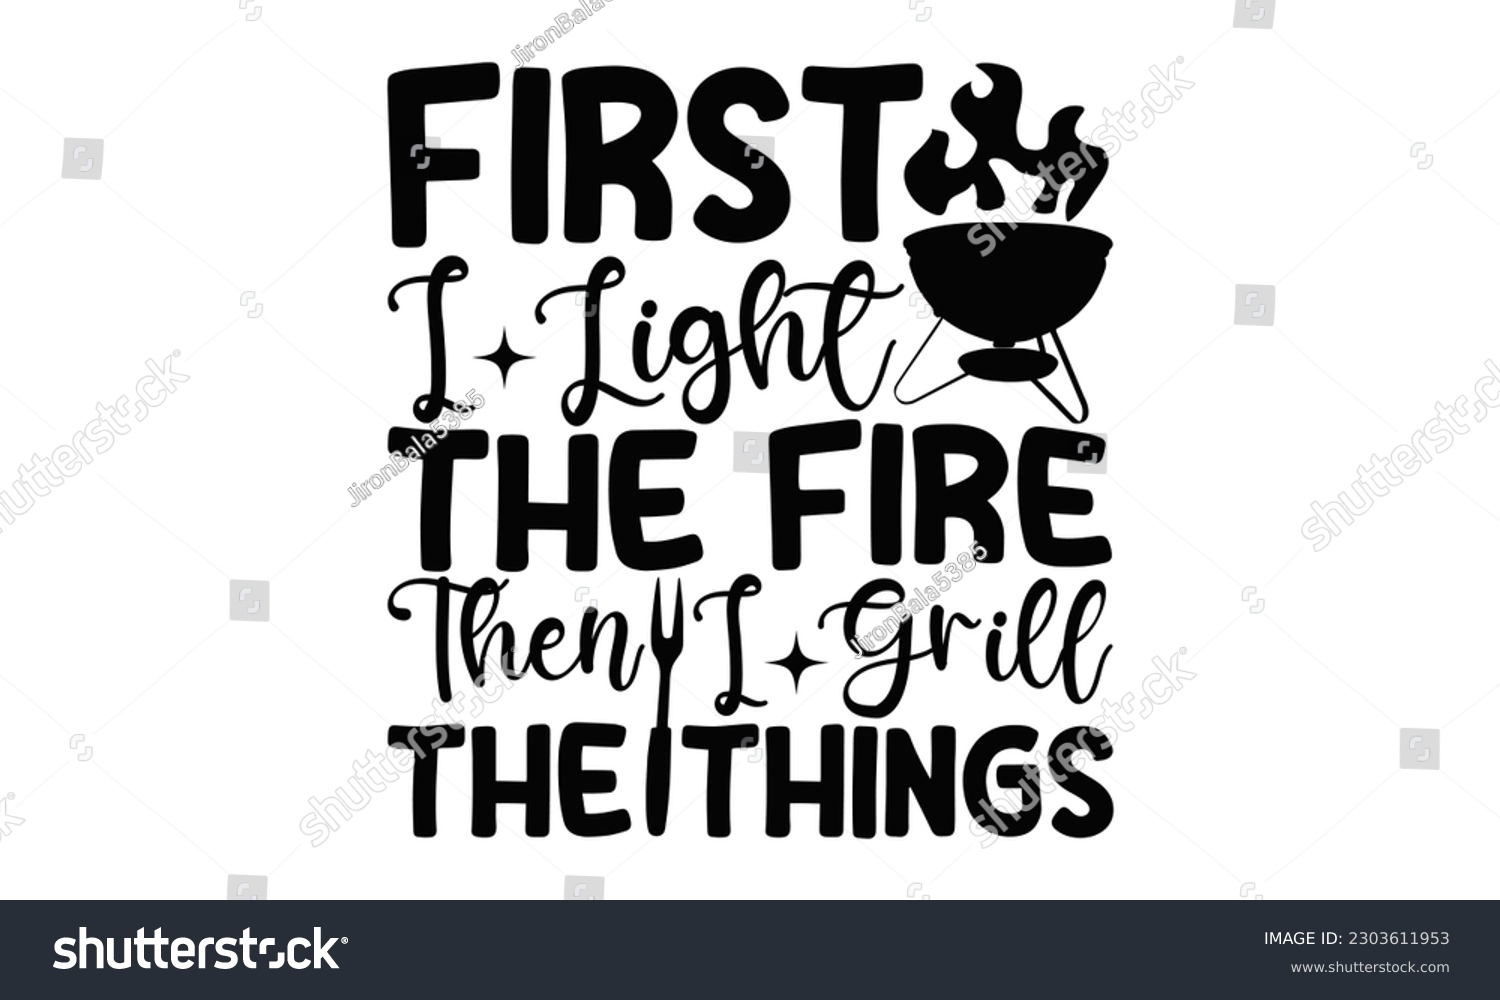 SVG of First I Light The Fire Then I Grill The Things - Barbecue  SVG Design, Hand drawn vintage illustration with hand-lettering and decoration elements with, SVG Files for Cutting.
 svg